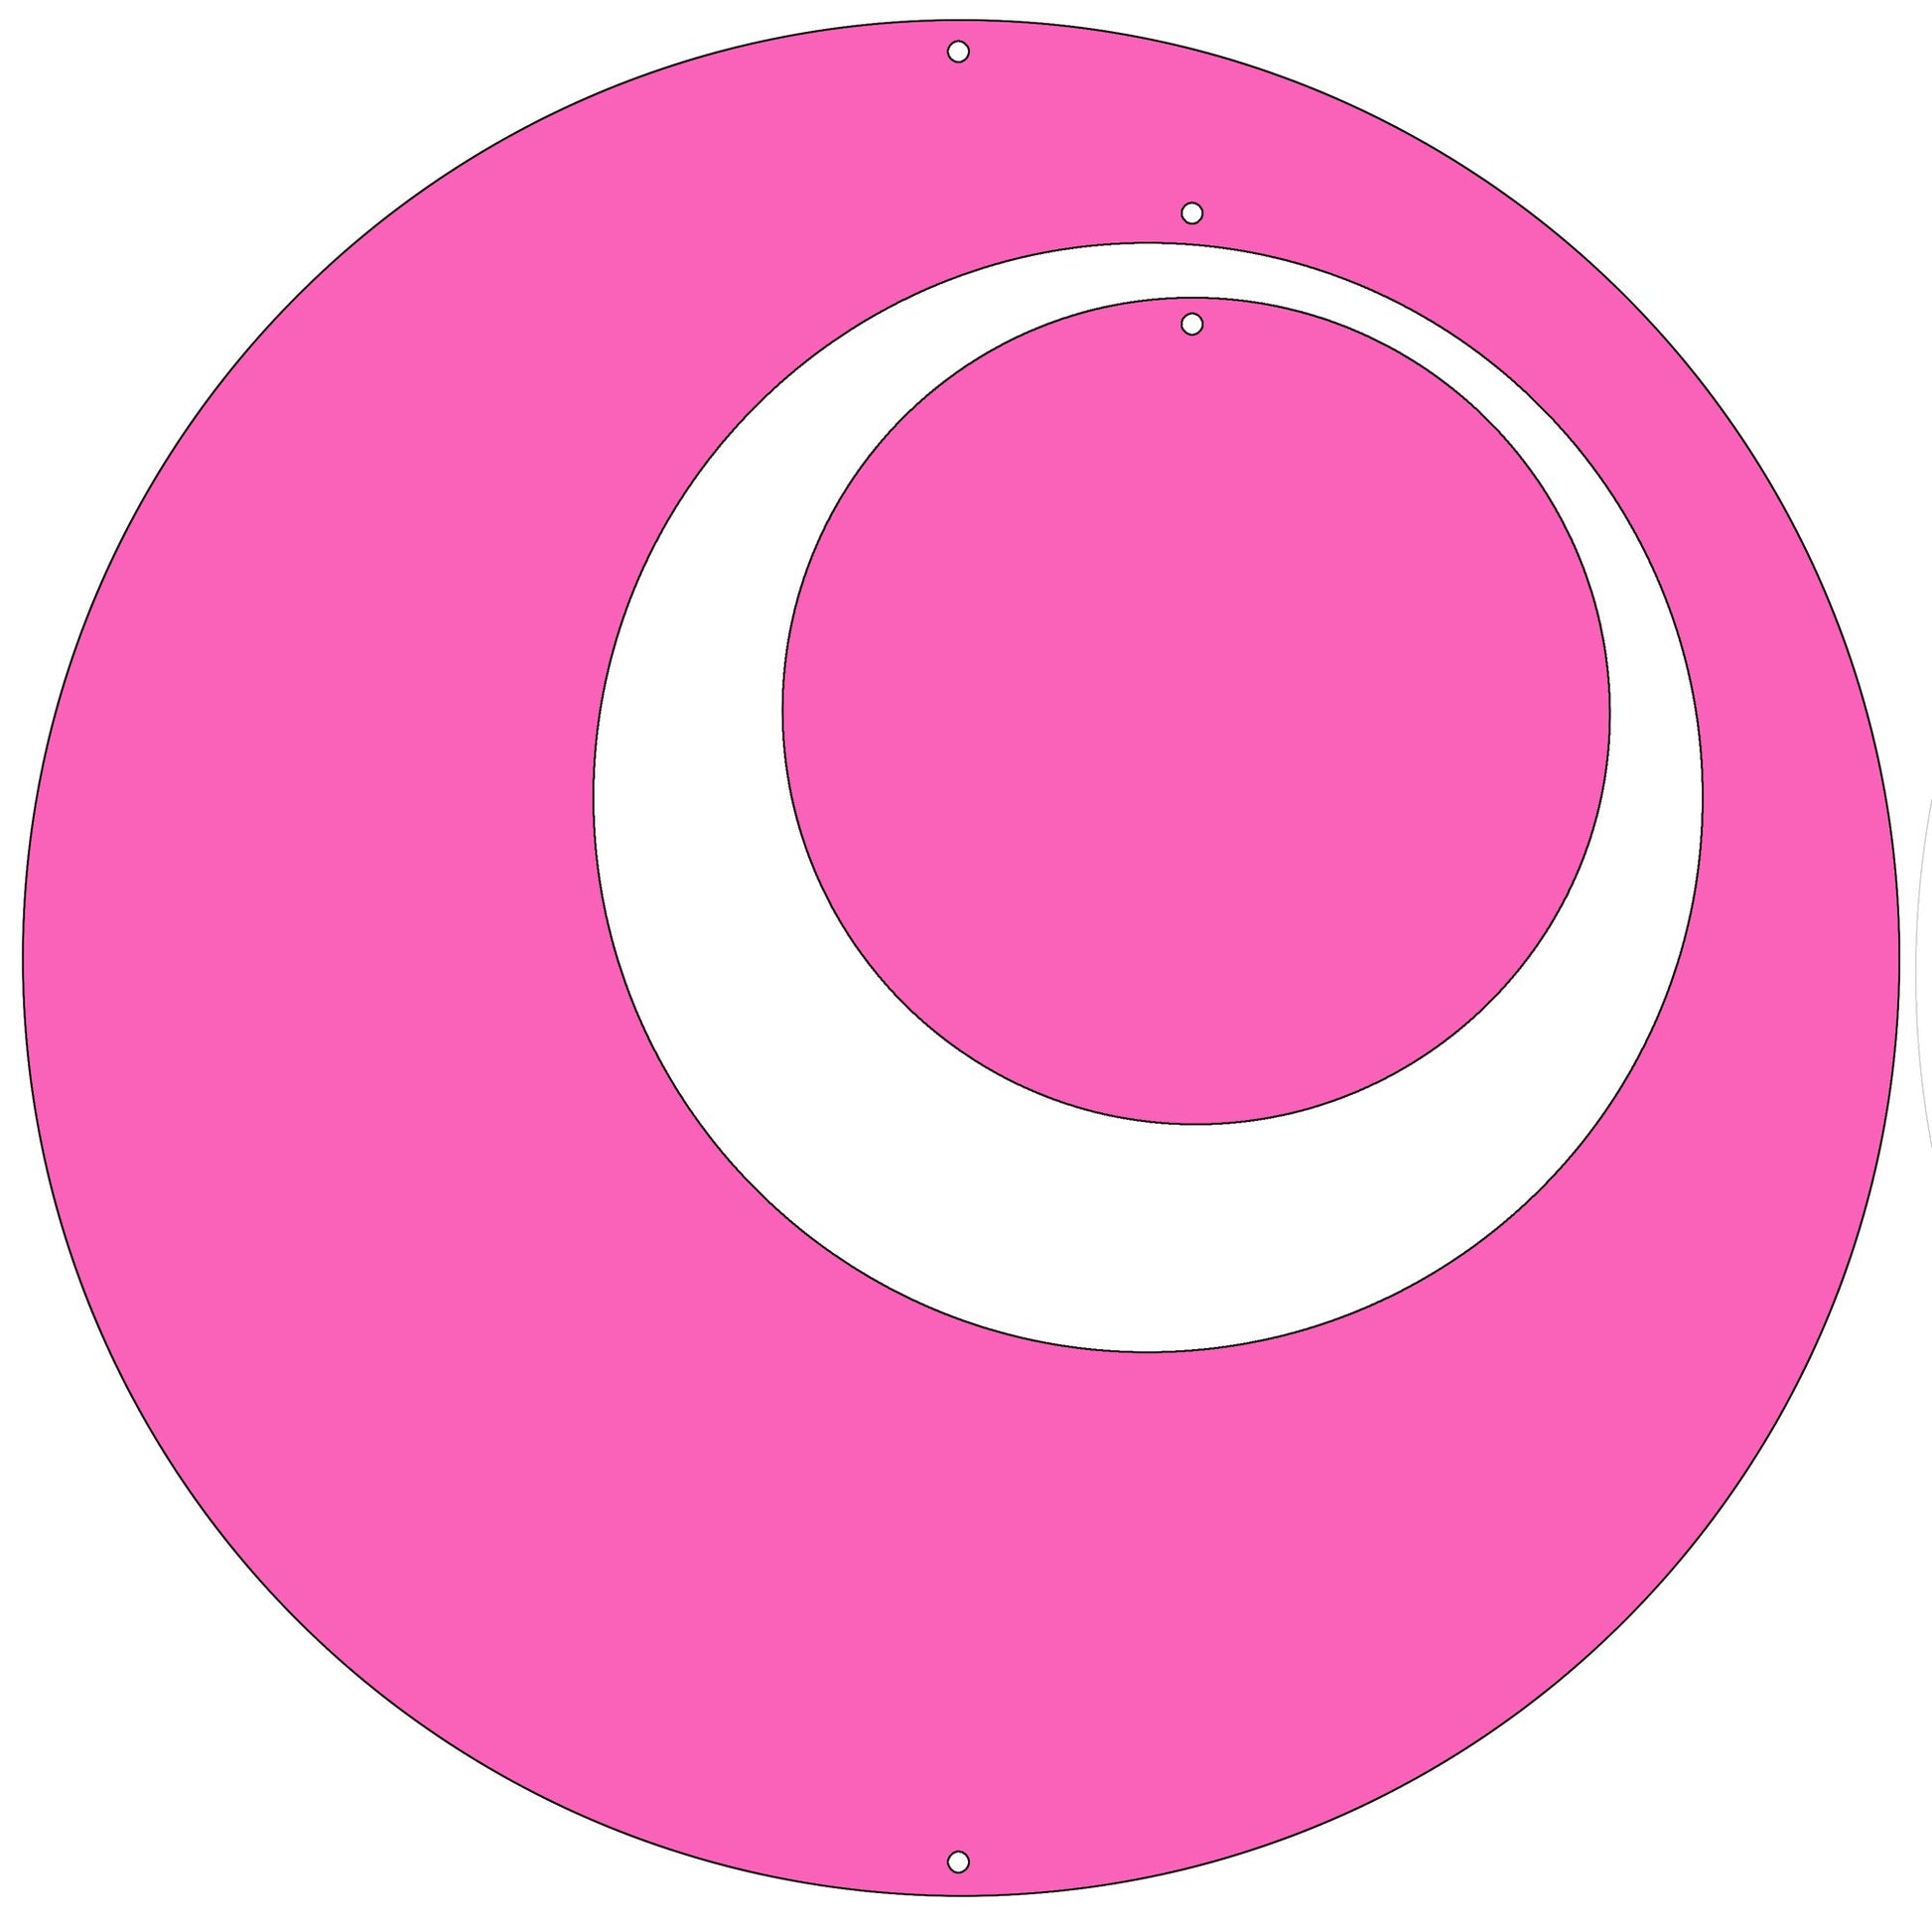 Hot Pink Circle Set for Groovy Atomic Screens - Room Dividers, Partitions, Curtains, and Window Treatments by AtomicMobiles.com